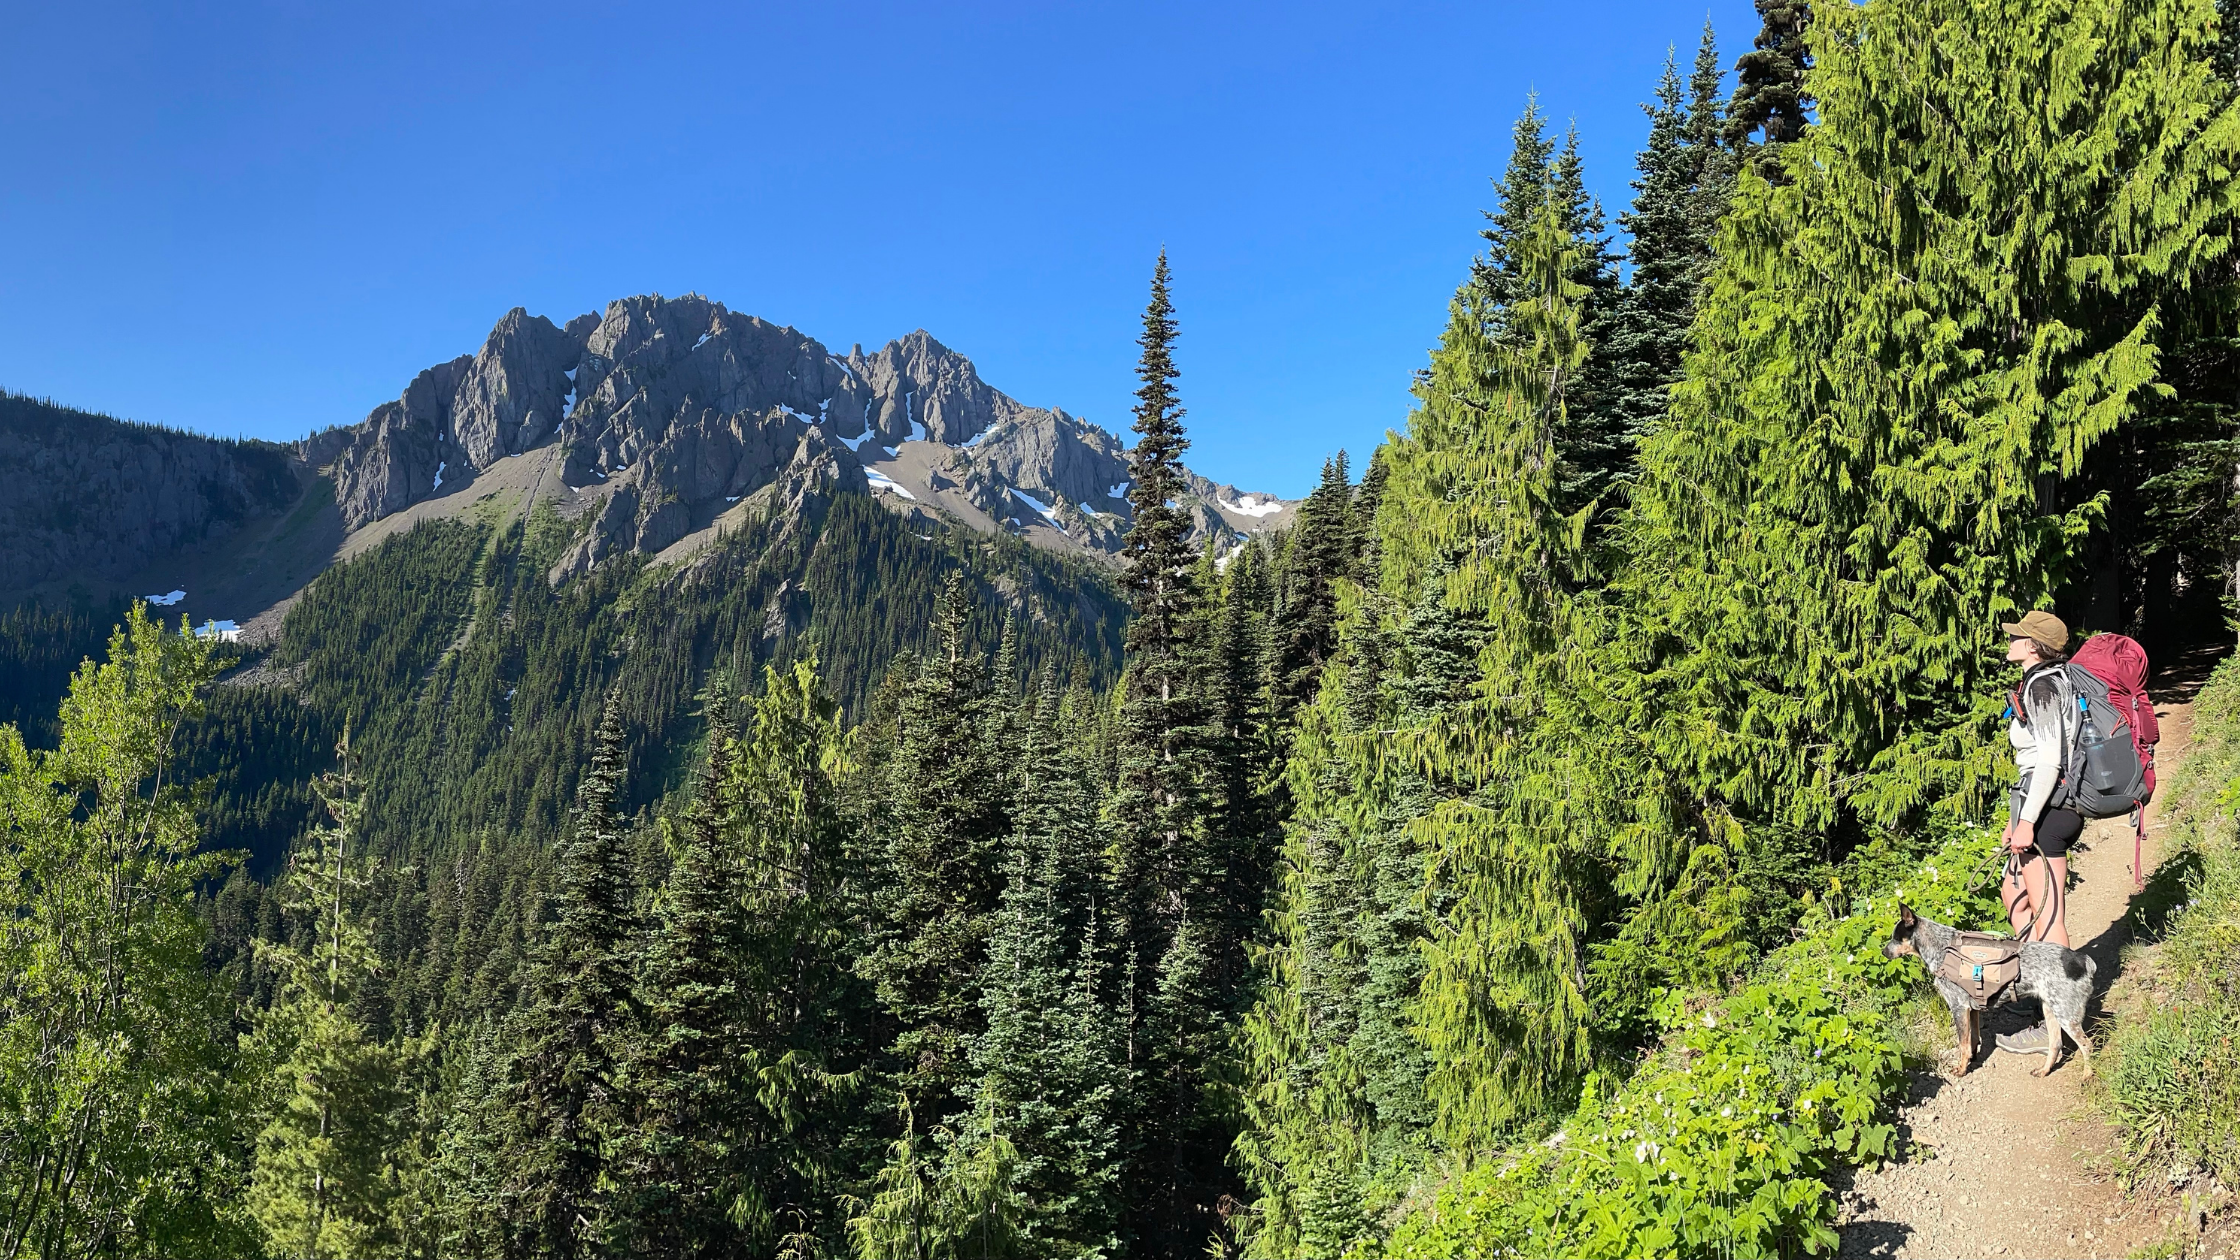 Backpacking Marmot Pass pic